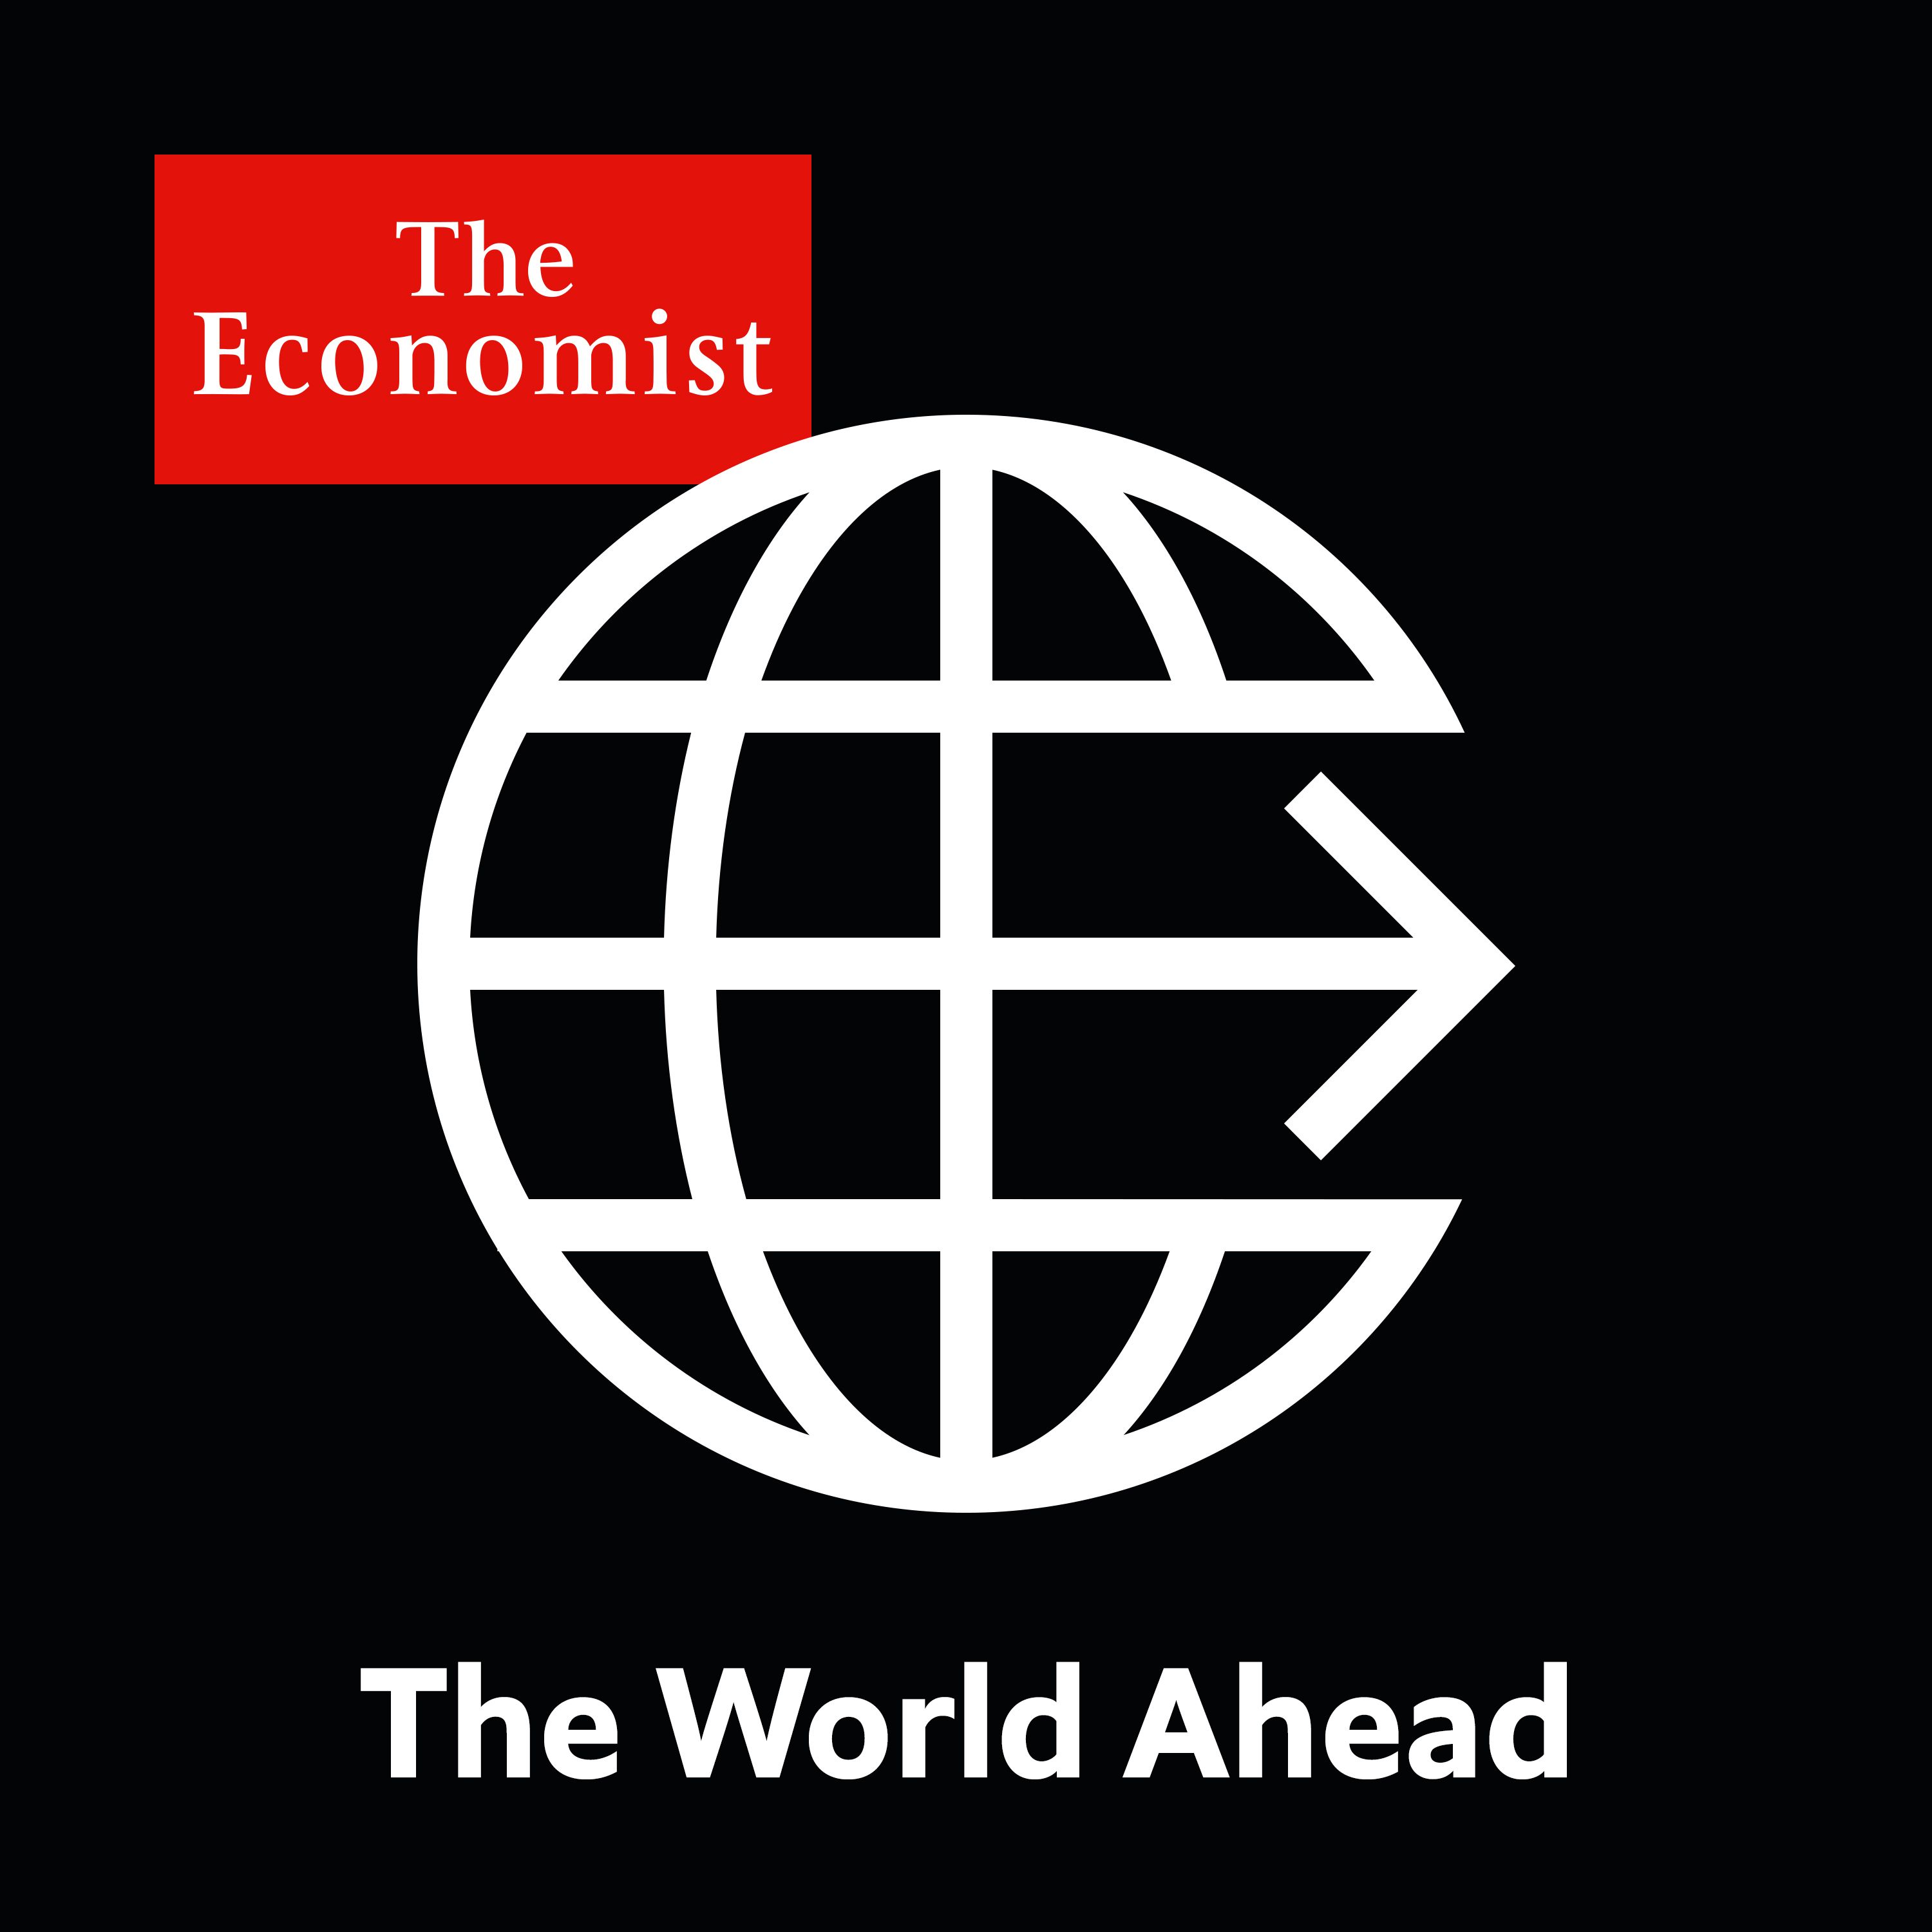 The World Ahead: Following the money